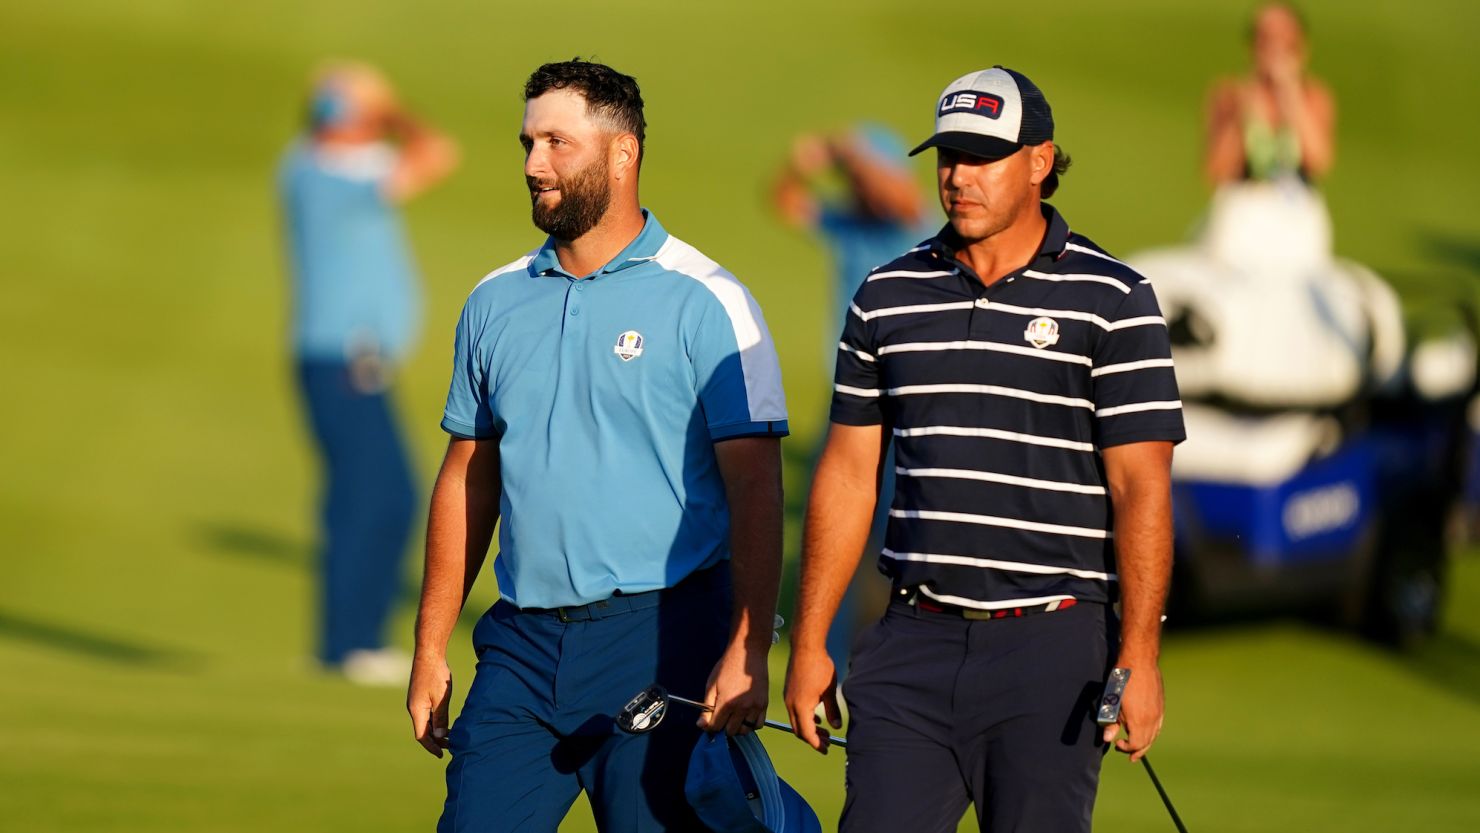 Players give revamped Marco Simone G.C., 2023 Ryder Cup site, mixed reviews  in debut, Golf News and Tour Information